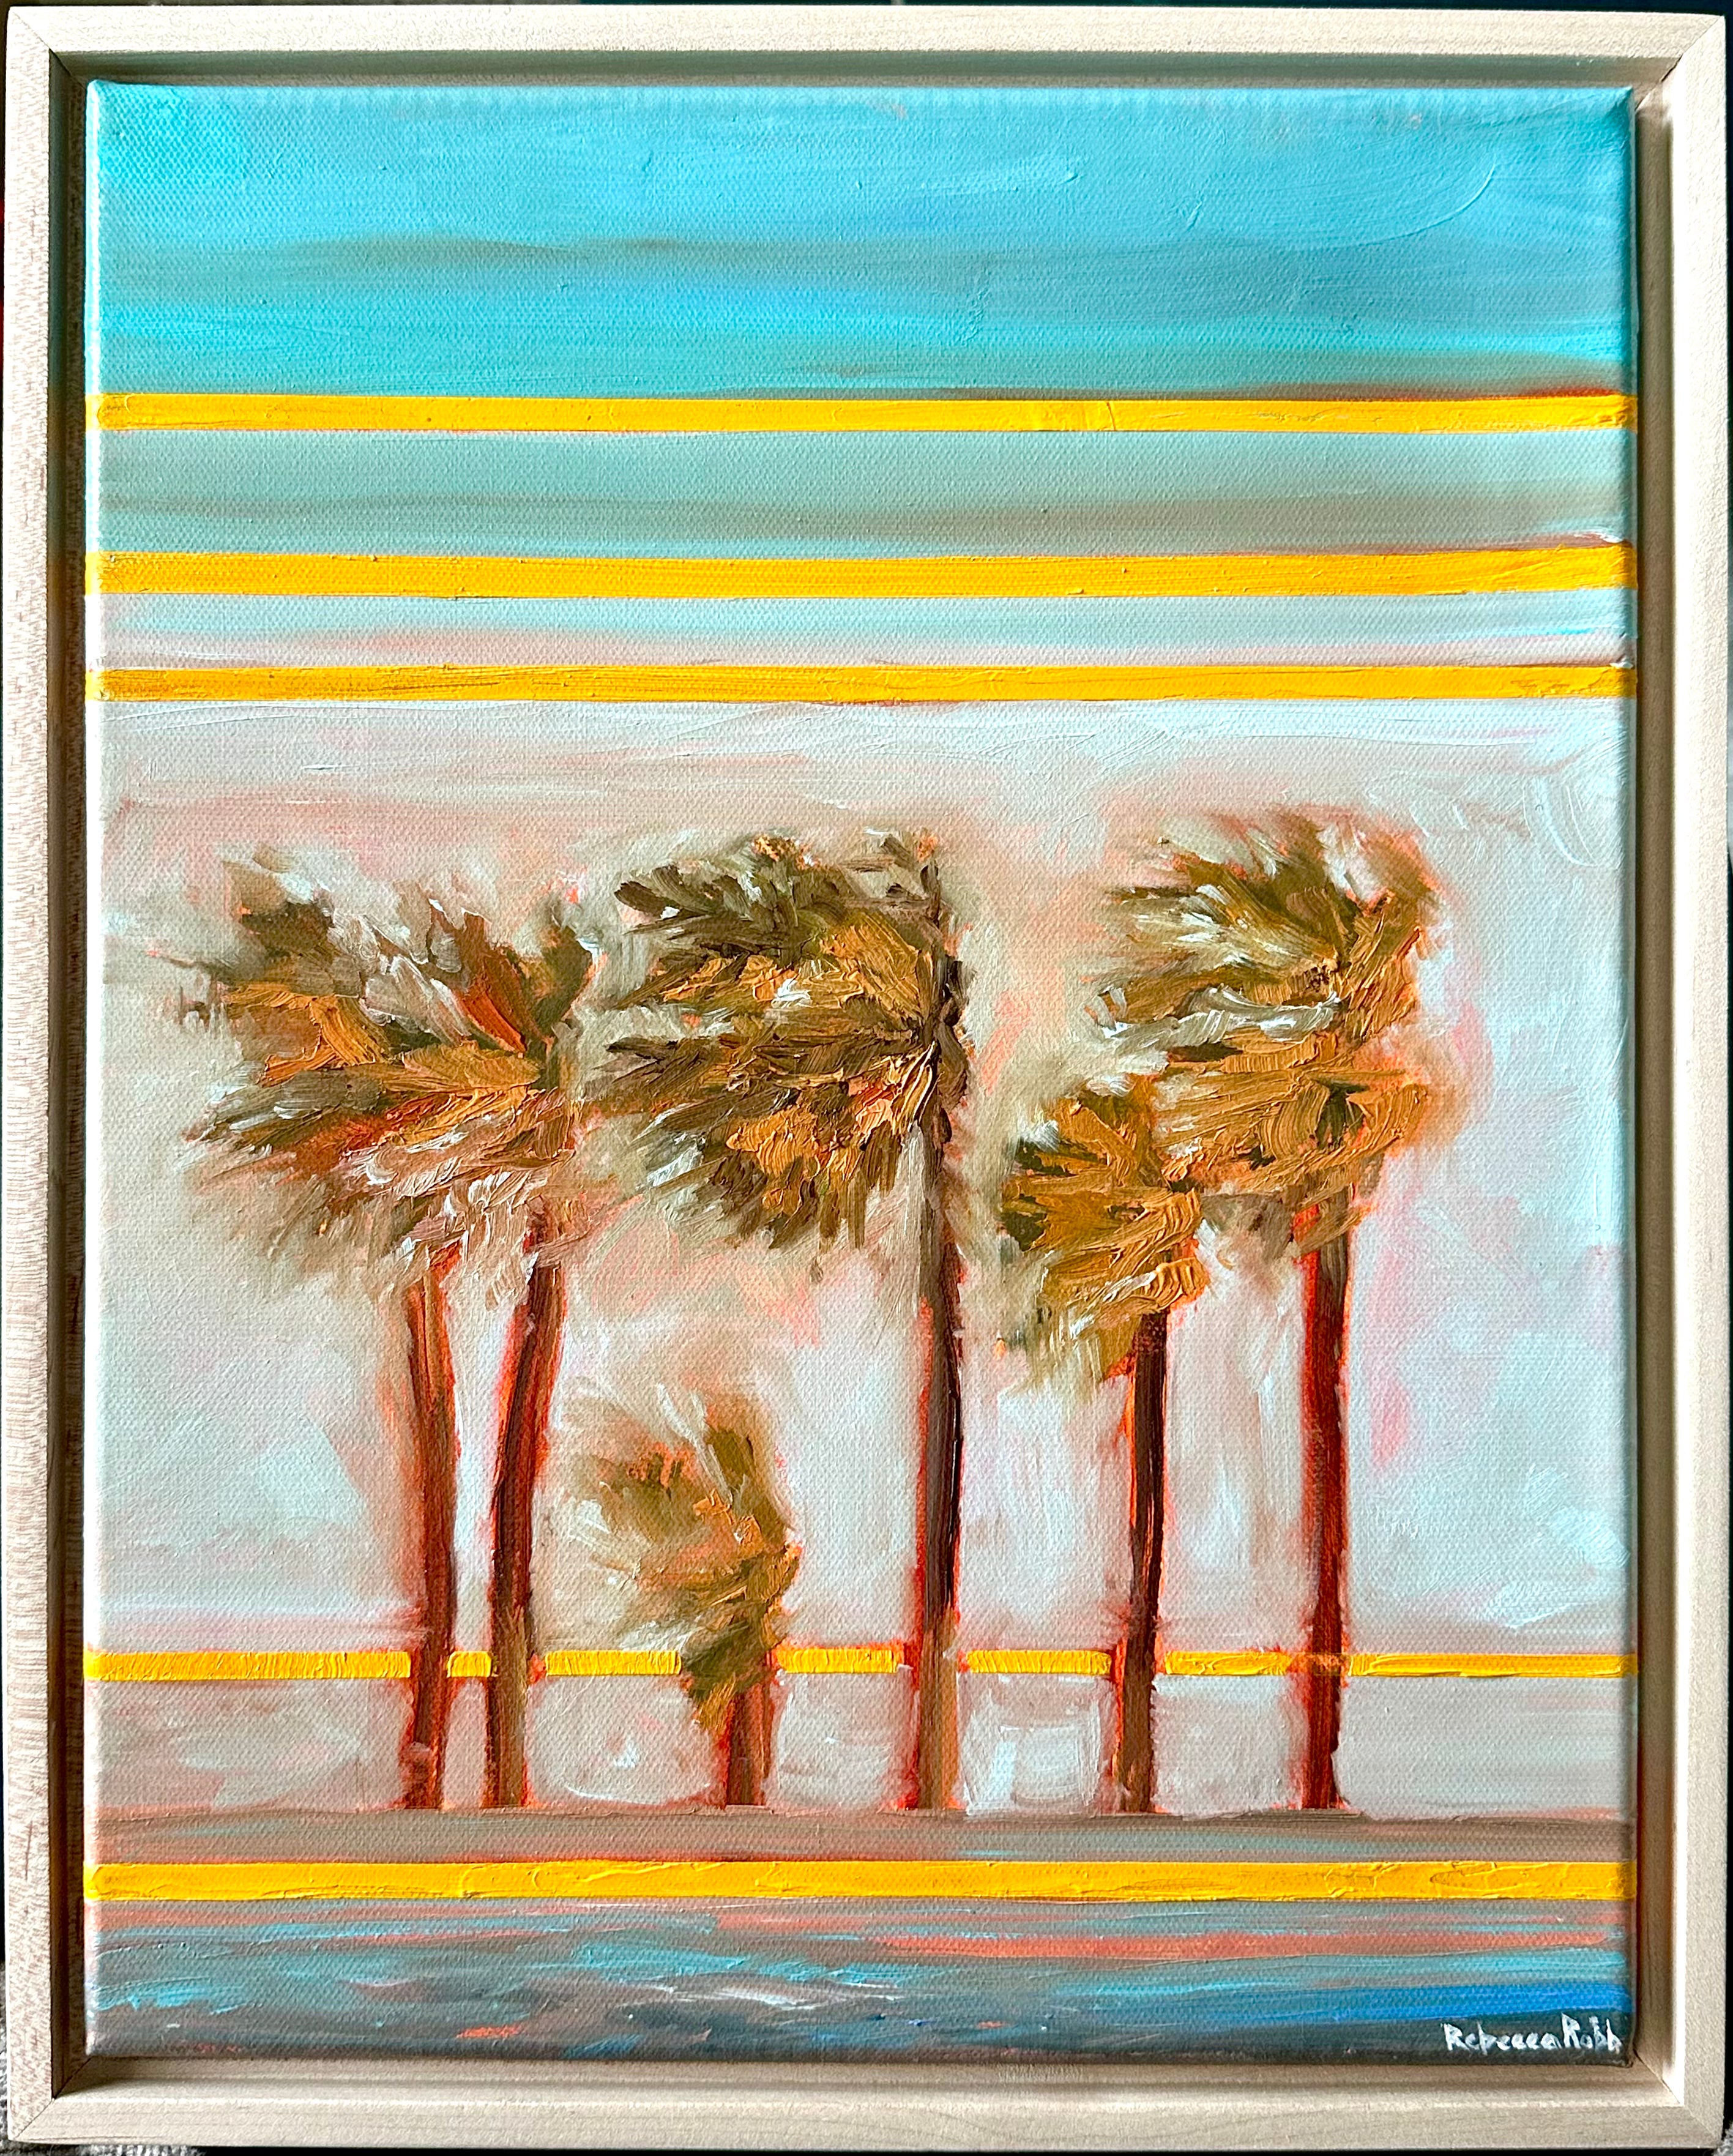 Palms In The Wind | Oil On Canvas | 11" x 14"